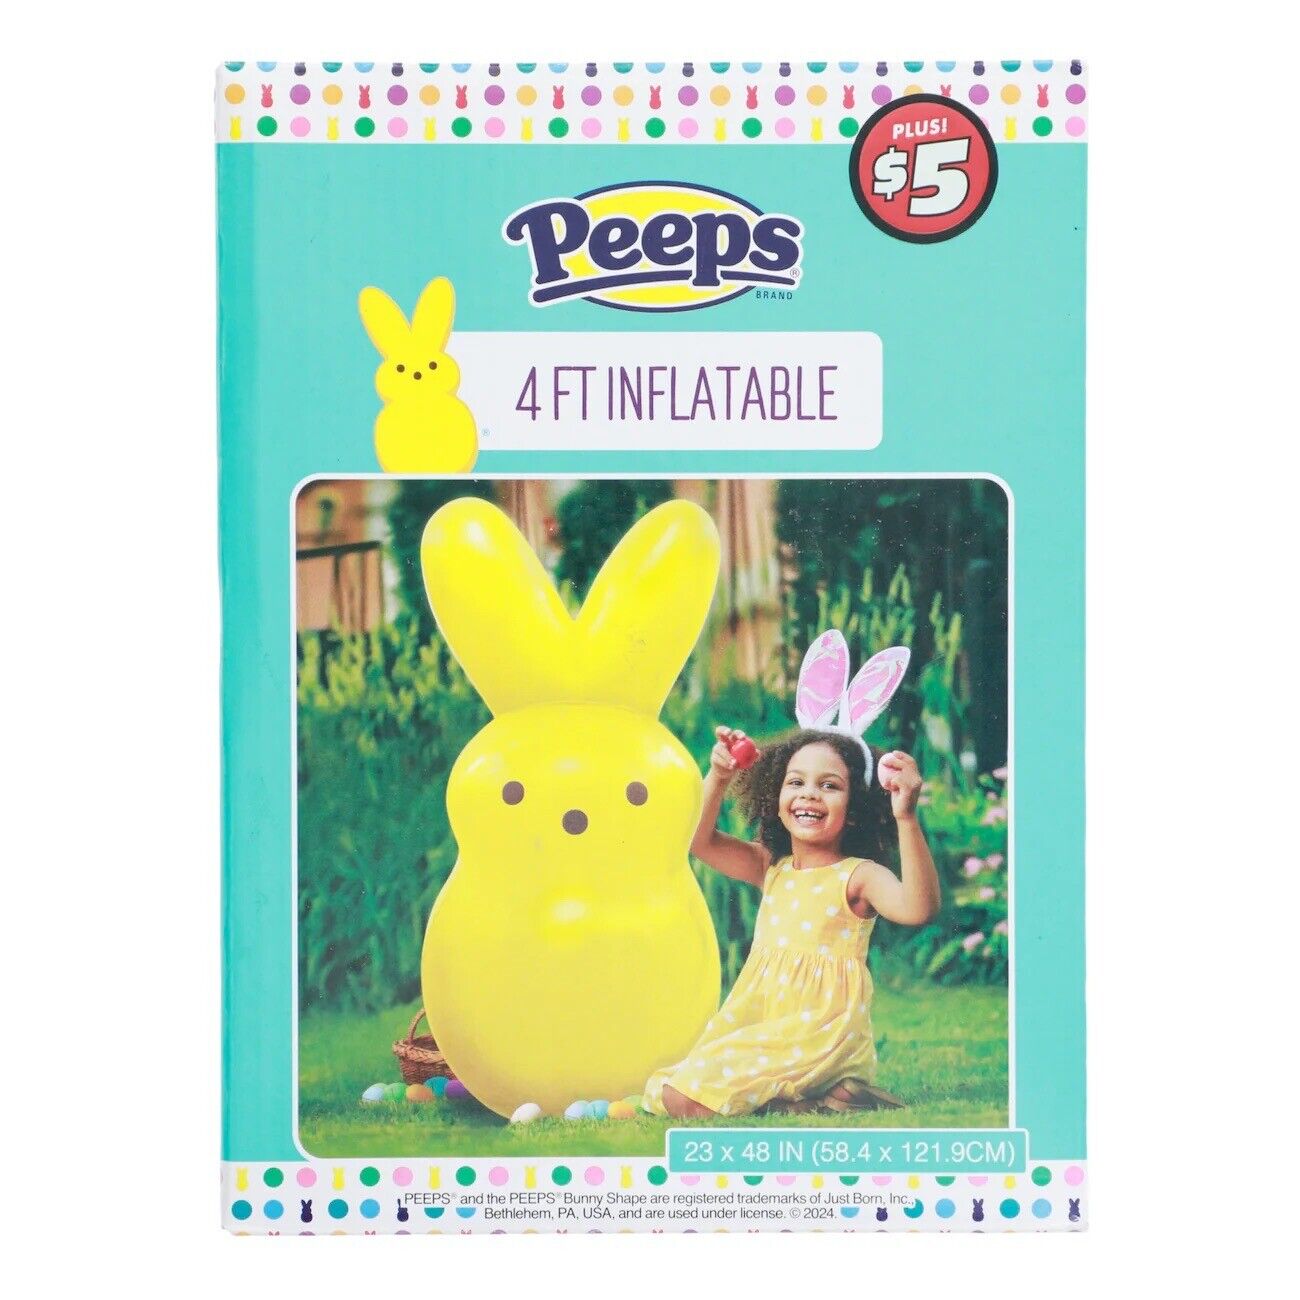 4’ Inflatable Peeps Brand New In Box 4 Ft Choice Blue Yellow Pink